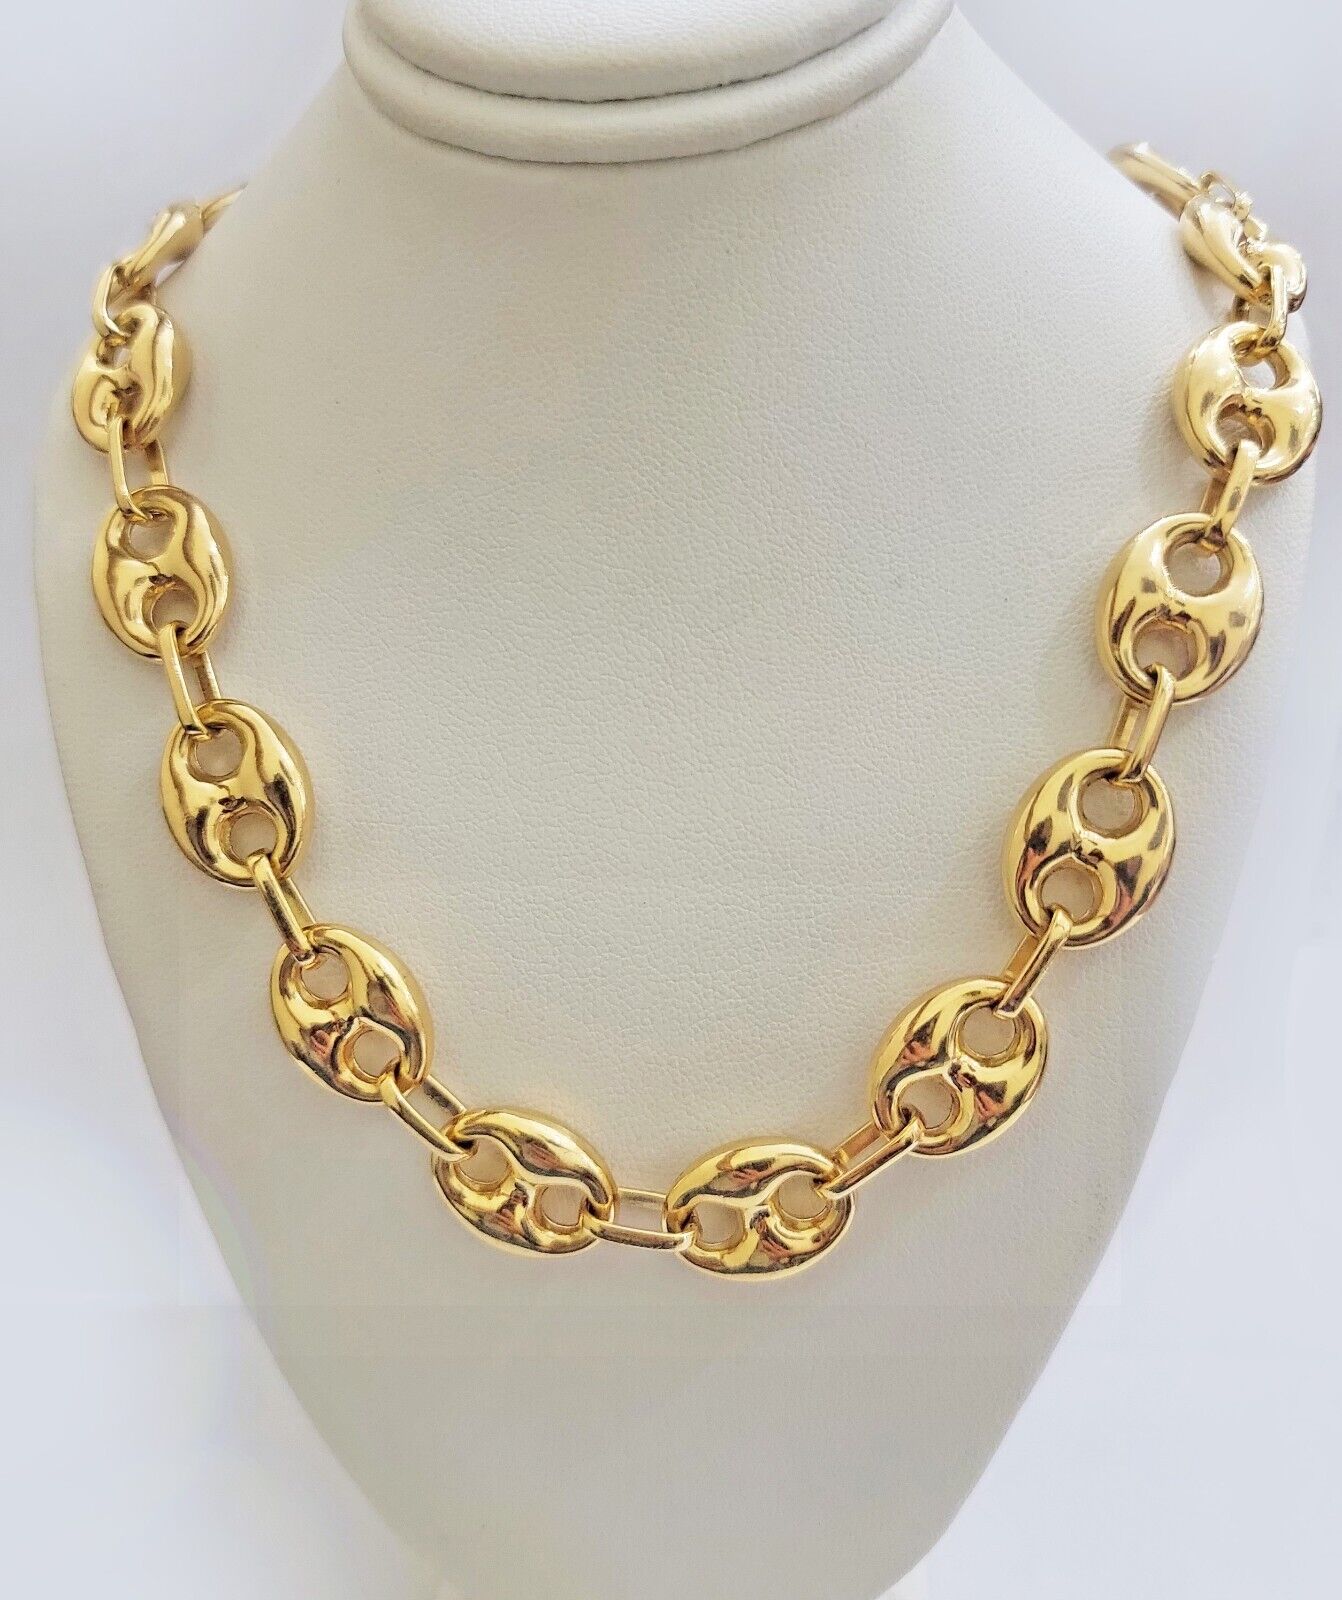 Real 10k Gold Puffed Mariner Anchor Link Chain Necklace 22